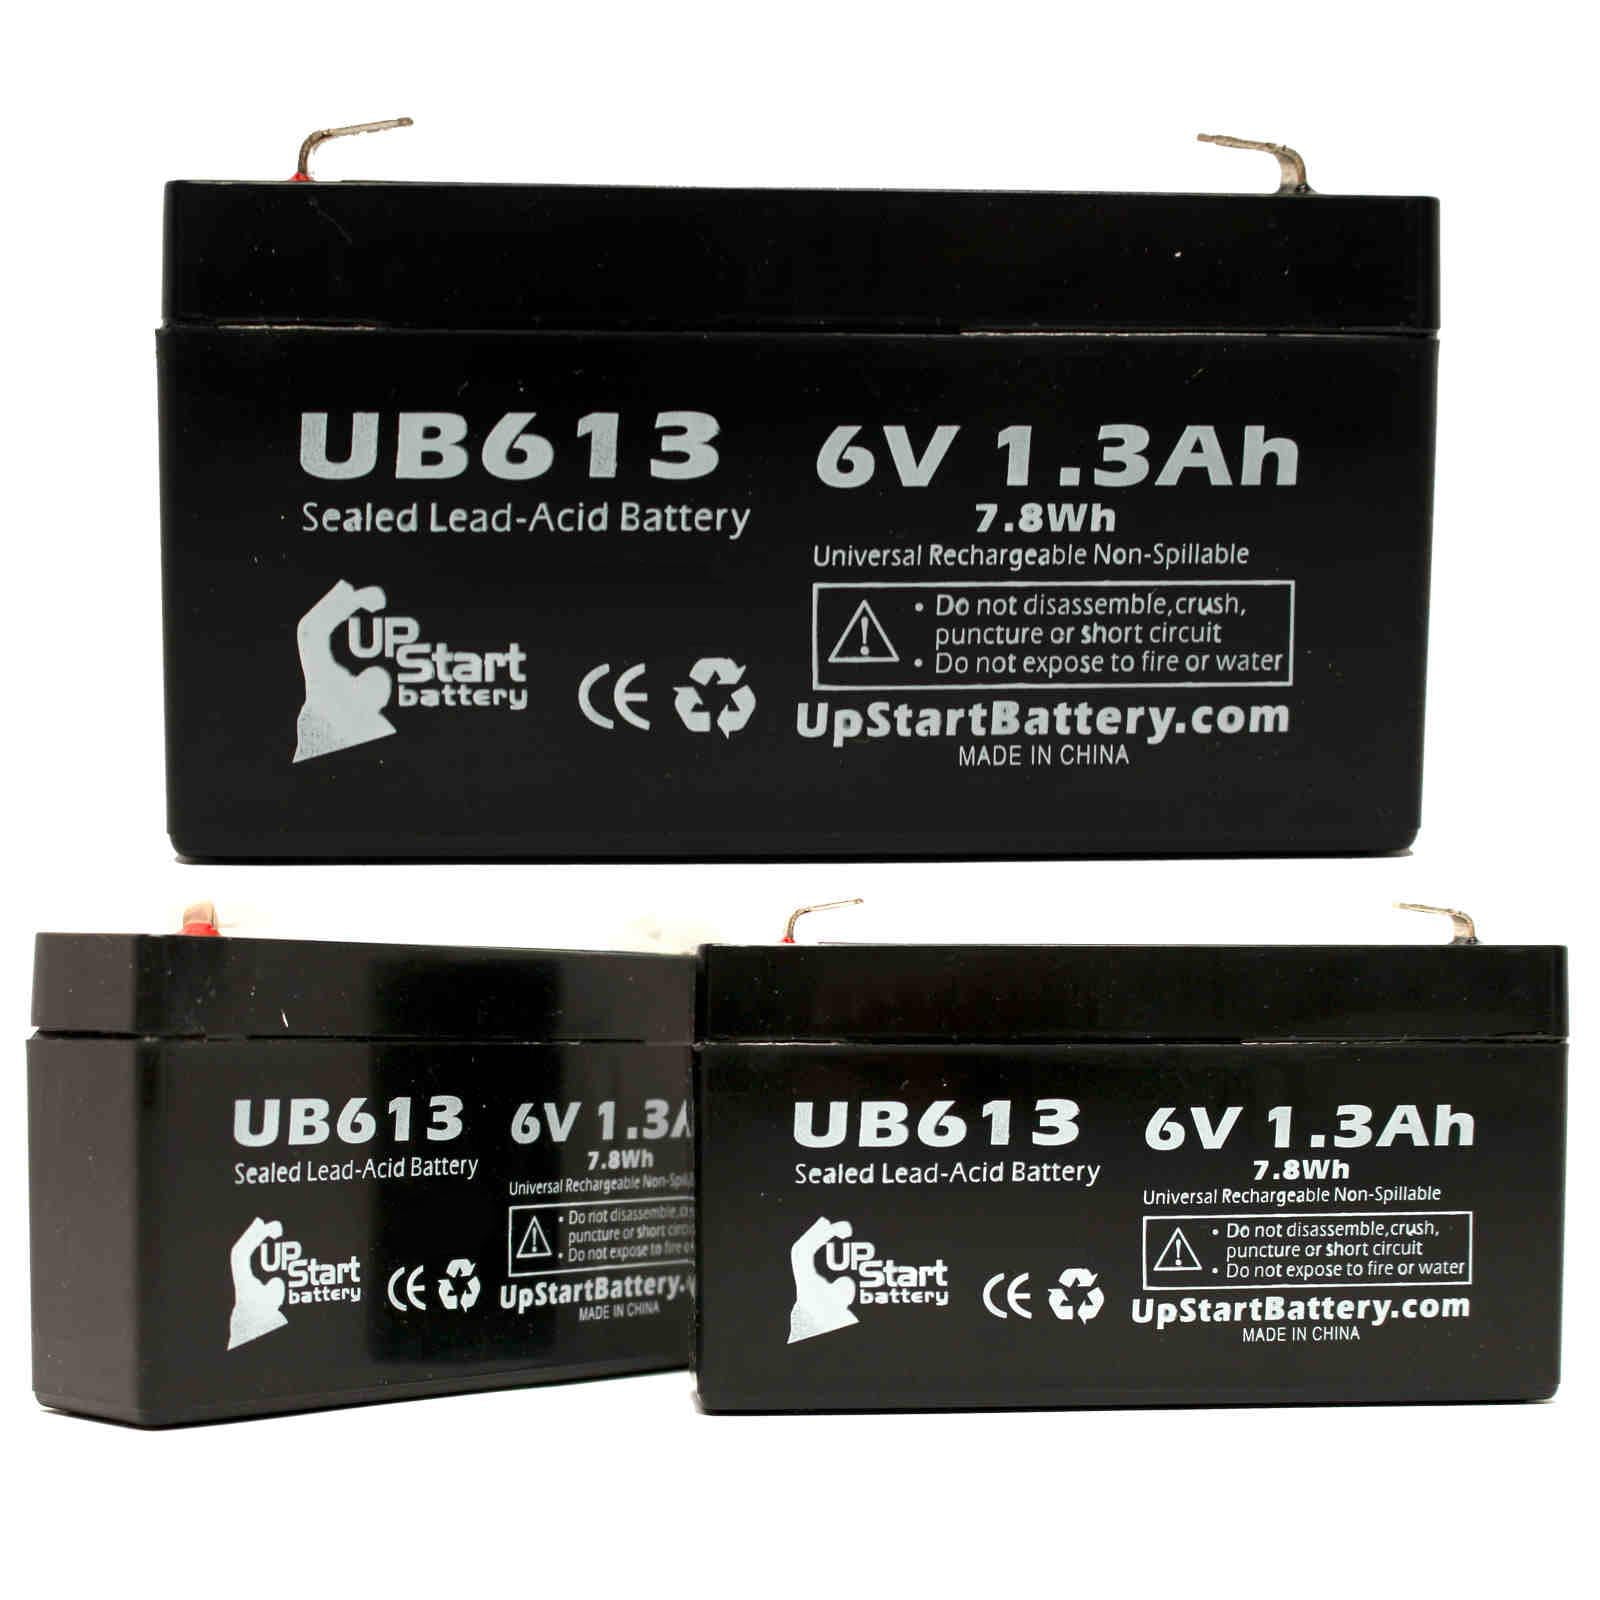 hvis Databasen tit 3x Pack - Compatible IBM 3624 TELLER Battery - Replacement UB613 Universal  Sealed Lead Acid Battery (6V, 1.3Ah, 1300mAh, F1 Terminal, AGM, SLA) -  Includes 6 F1 to F2 Terminal Adapters - Walmart.com